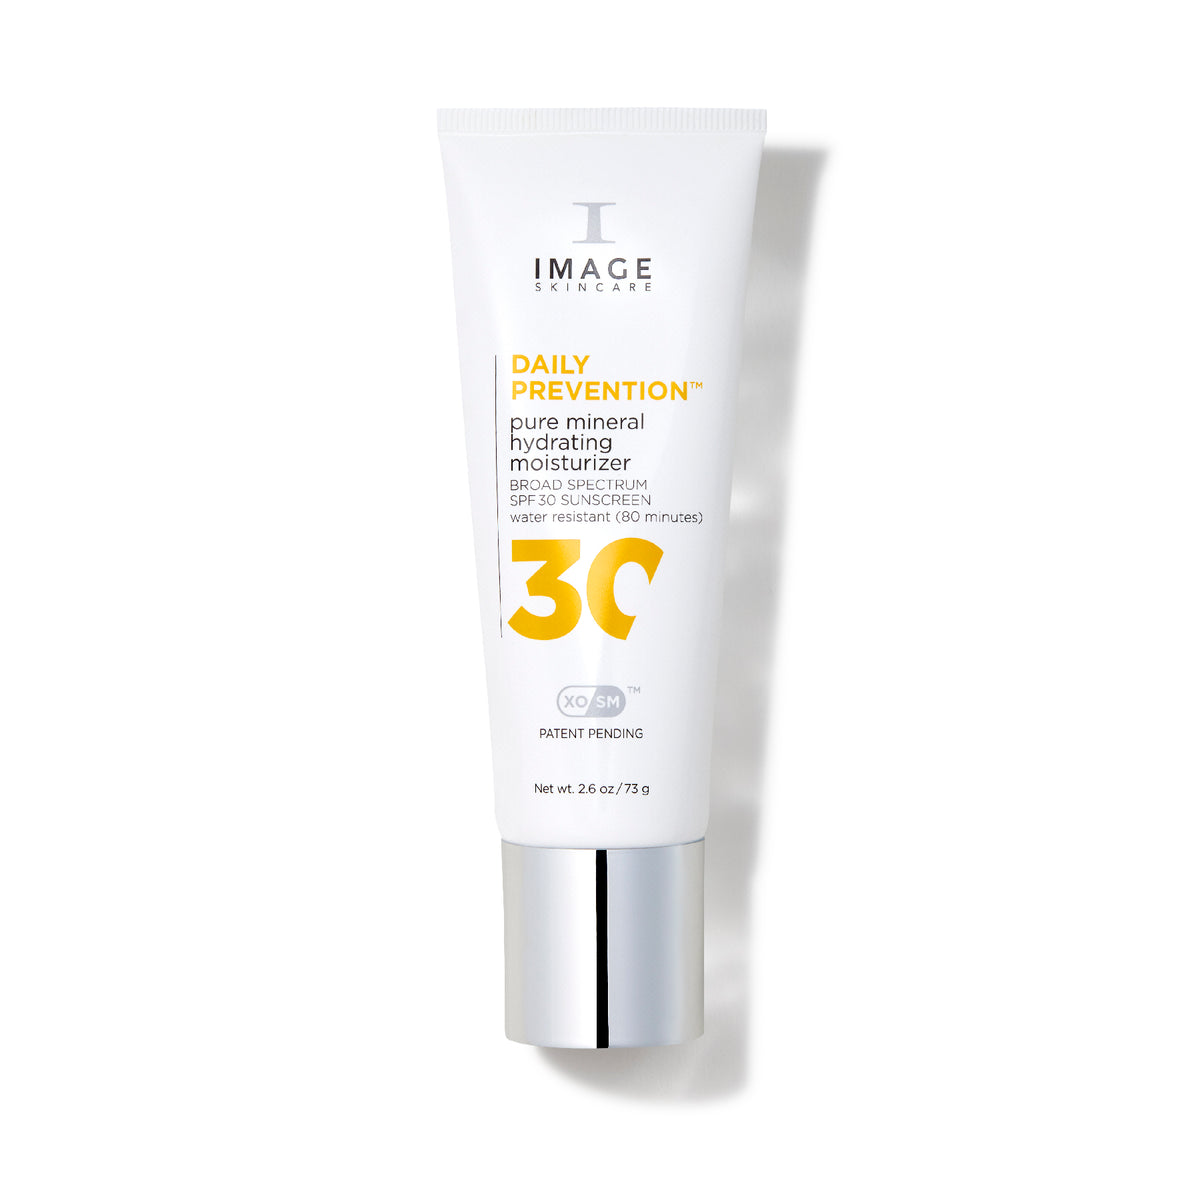 Image Skincare - DAILY PREVENTION™ pure mineral hydrating moisturizer SPF30 (3.2oz)